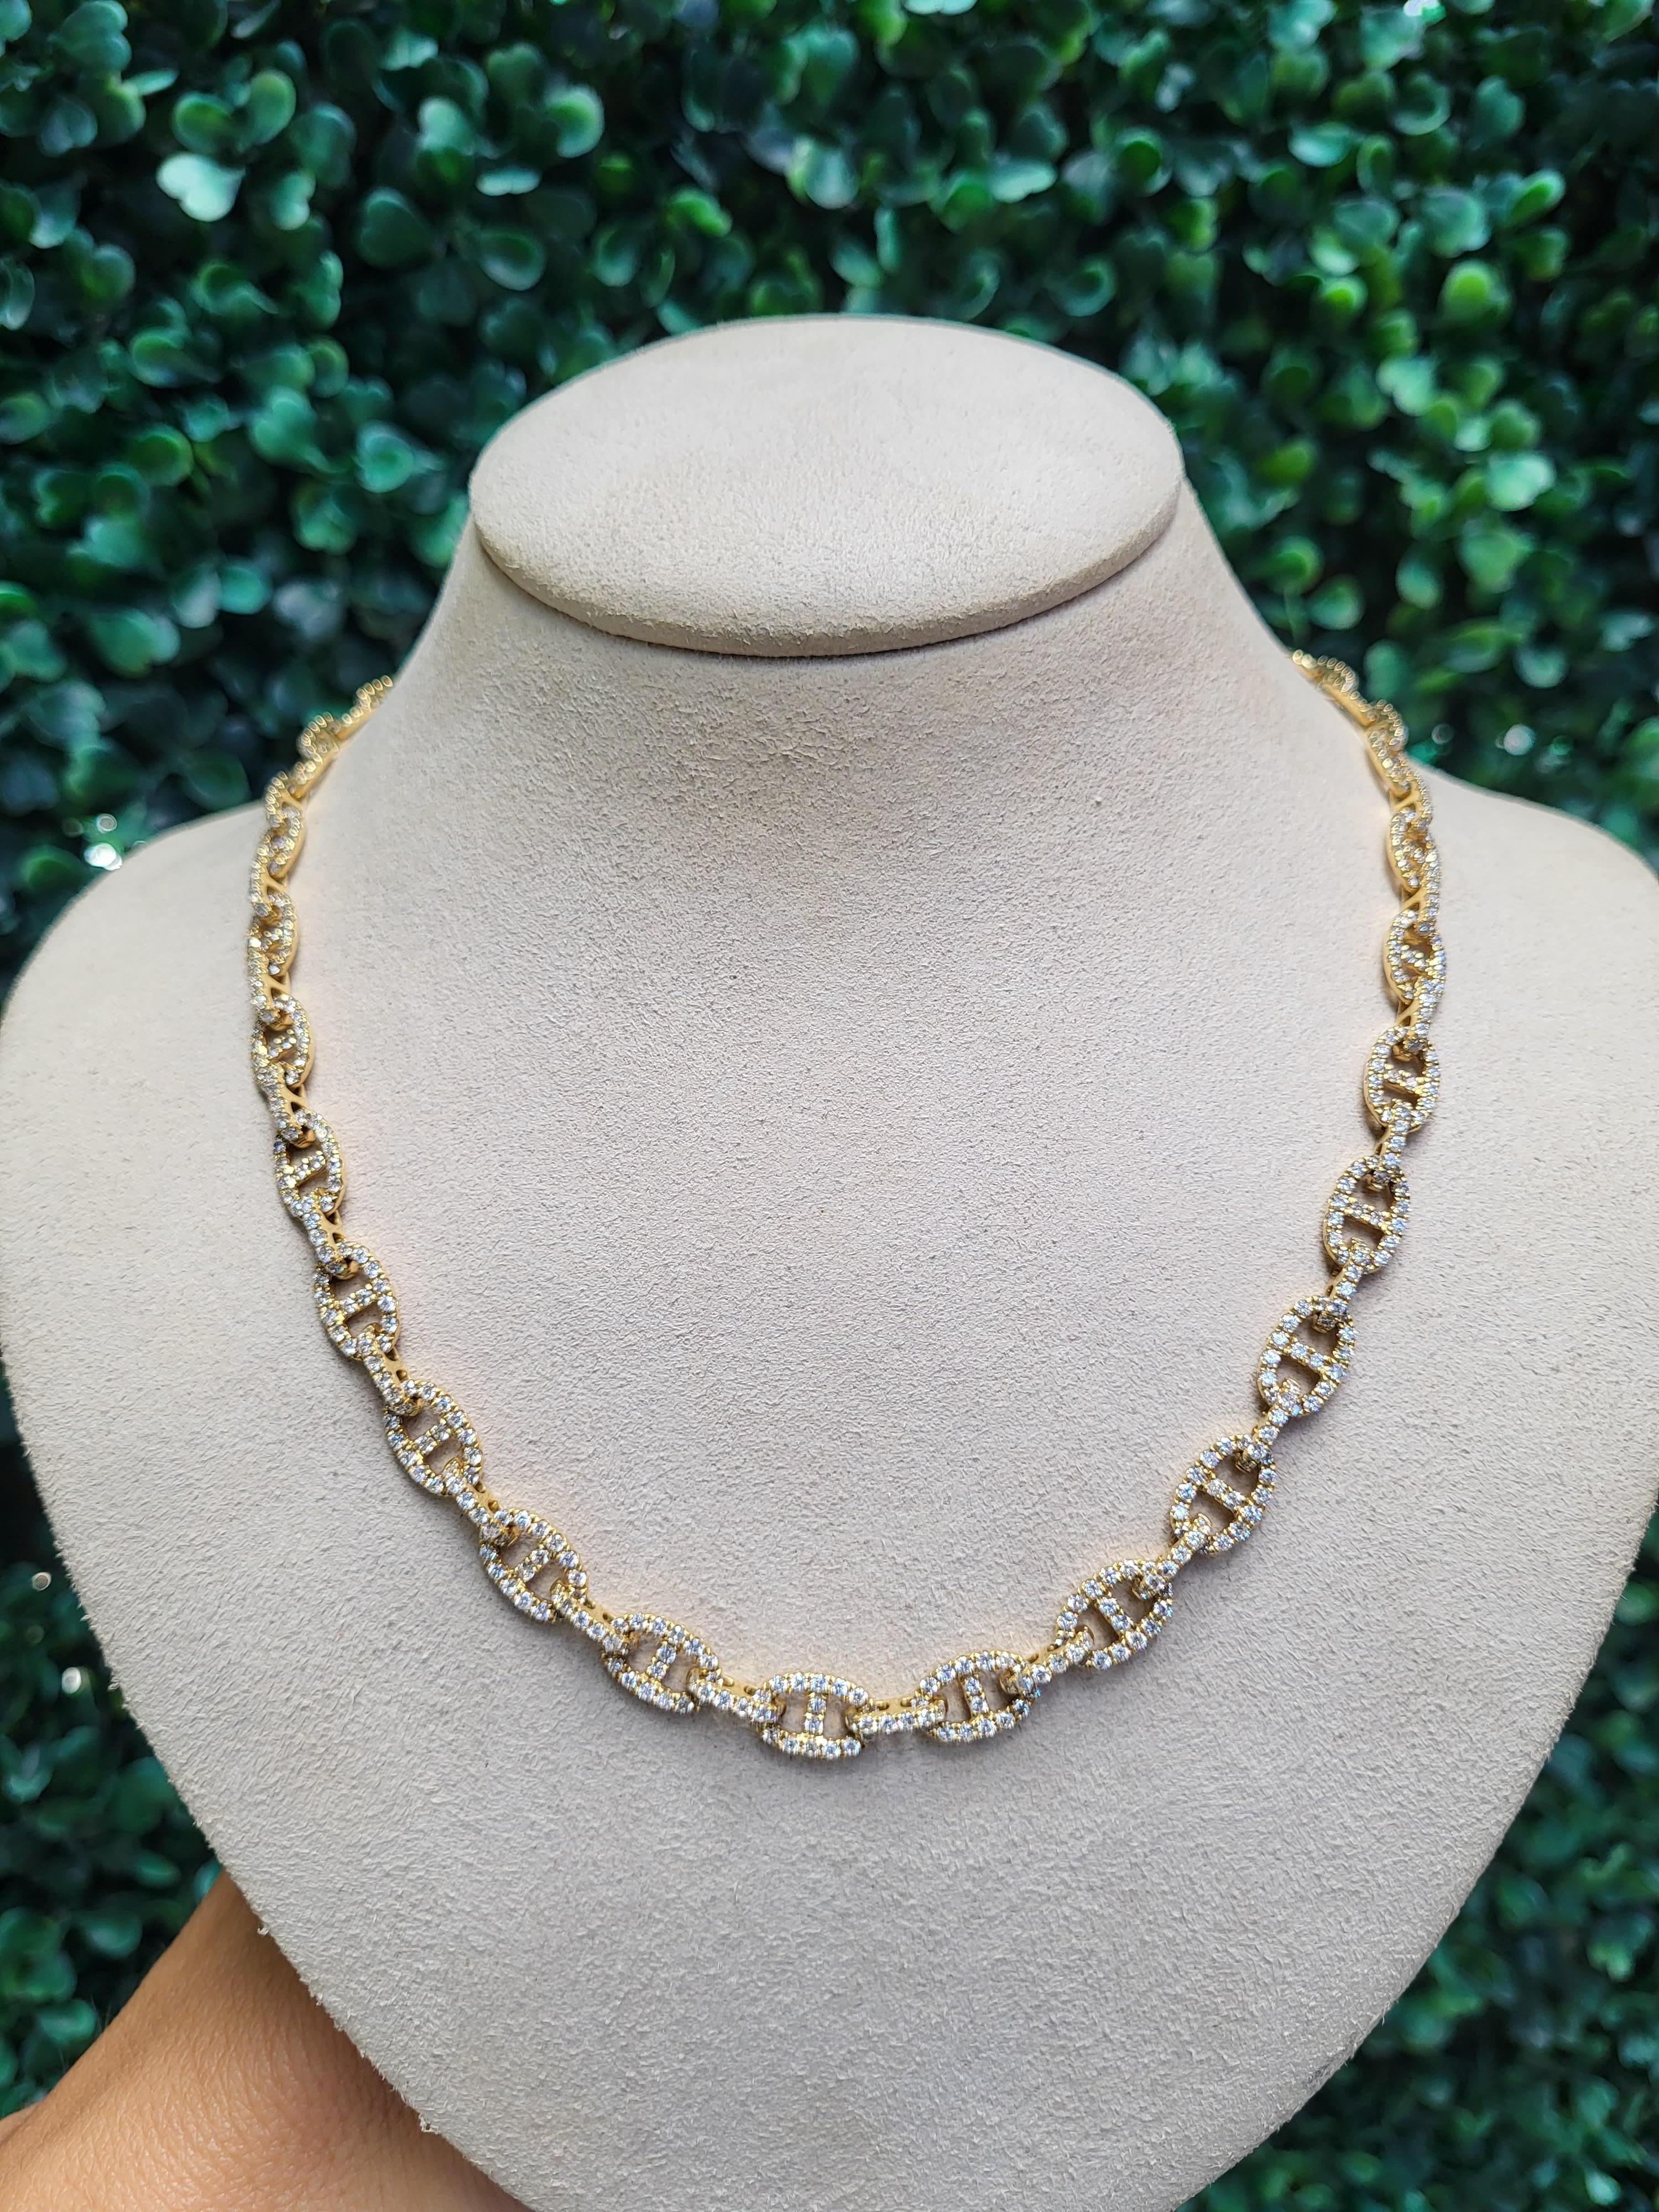 18 Karat Yellow Gold 6.22 Carat Total Weight Round Diamond Link Necklace For Sale 4